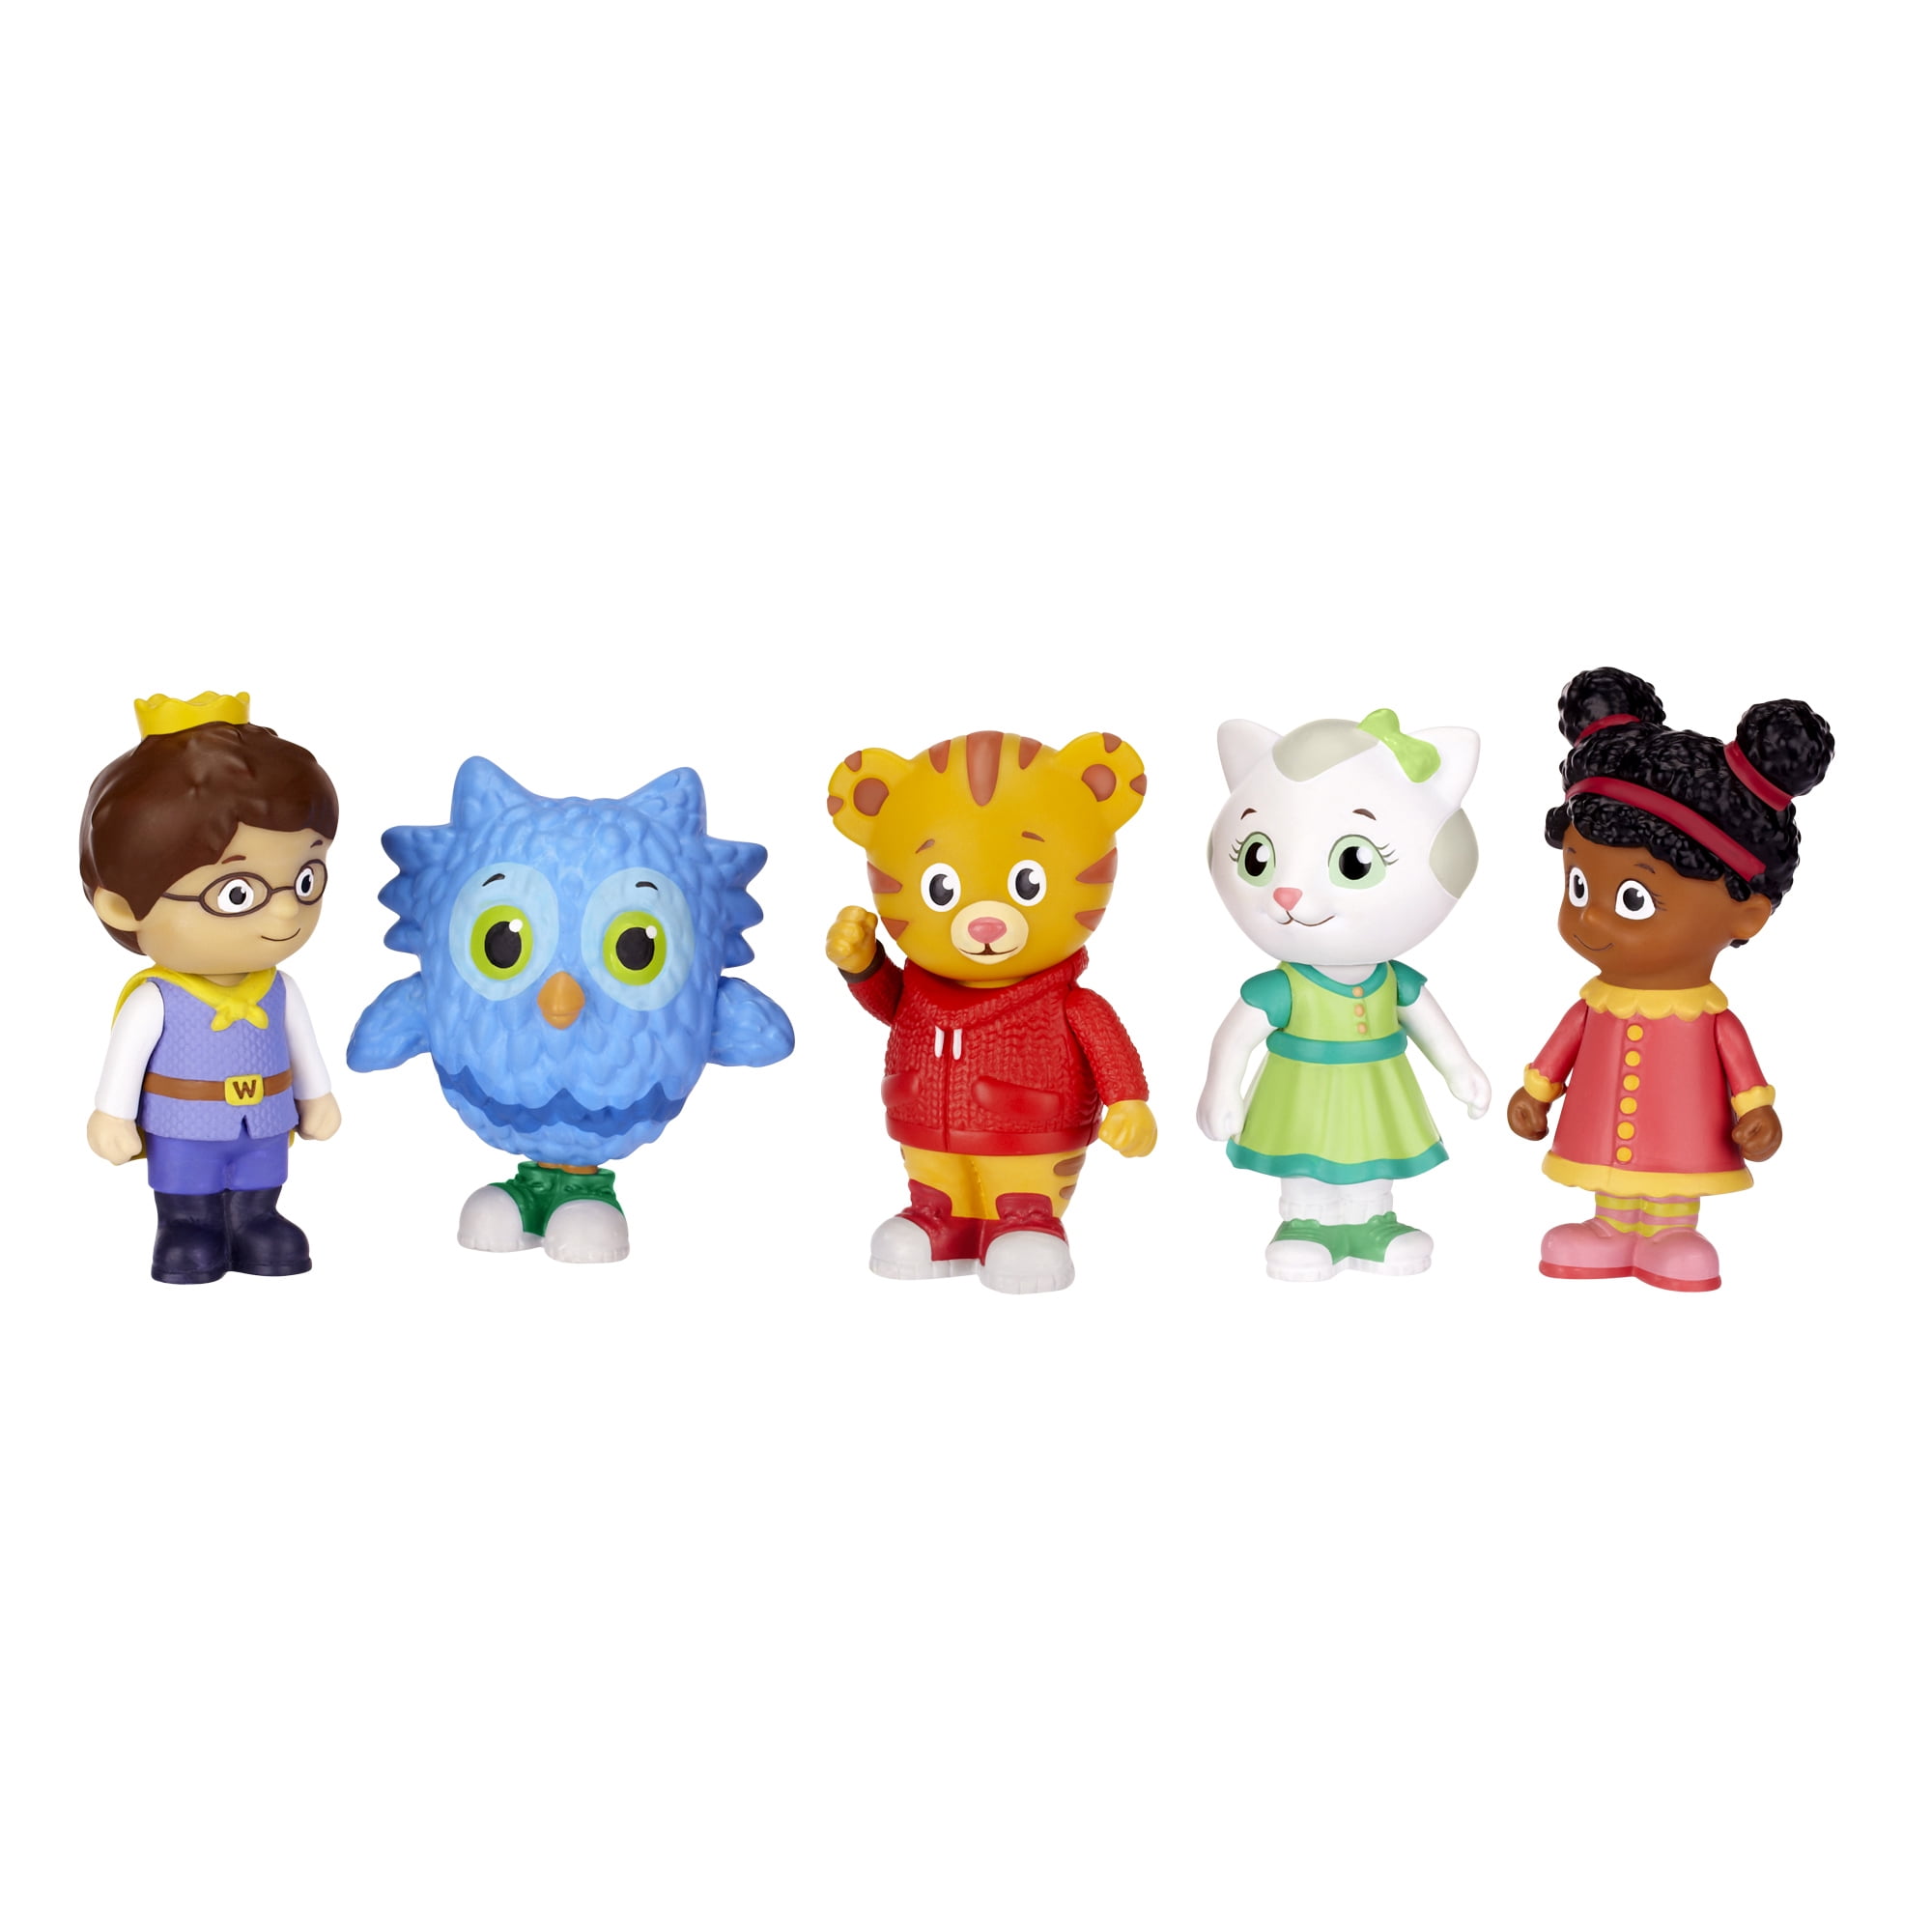 BRAND Daniel Tiger's Neighborhood Sing Along With Toy for sale online 